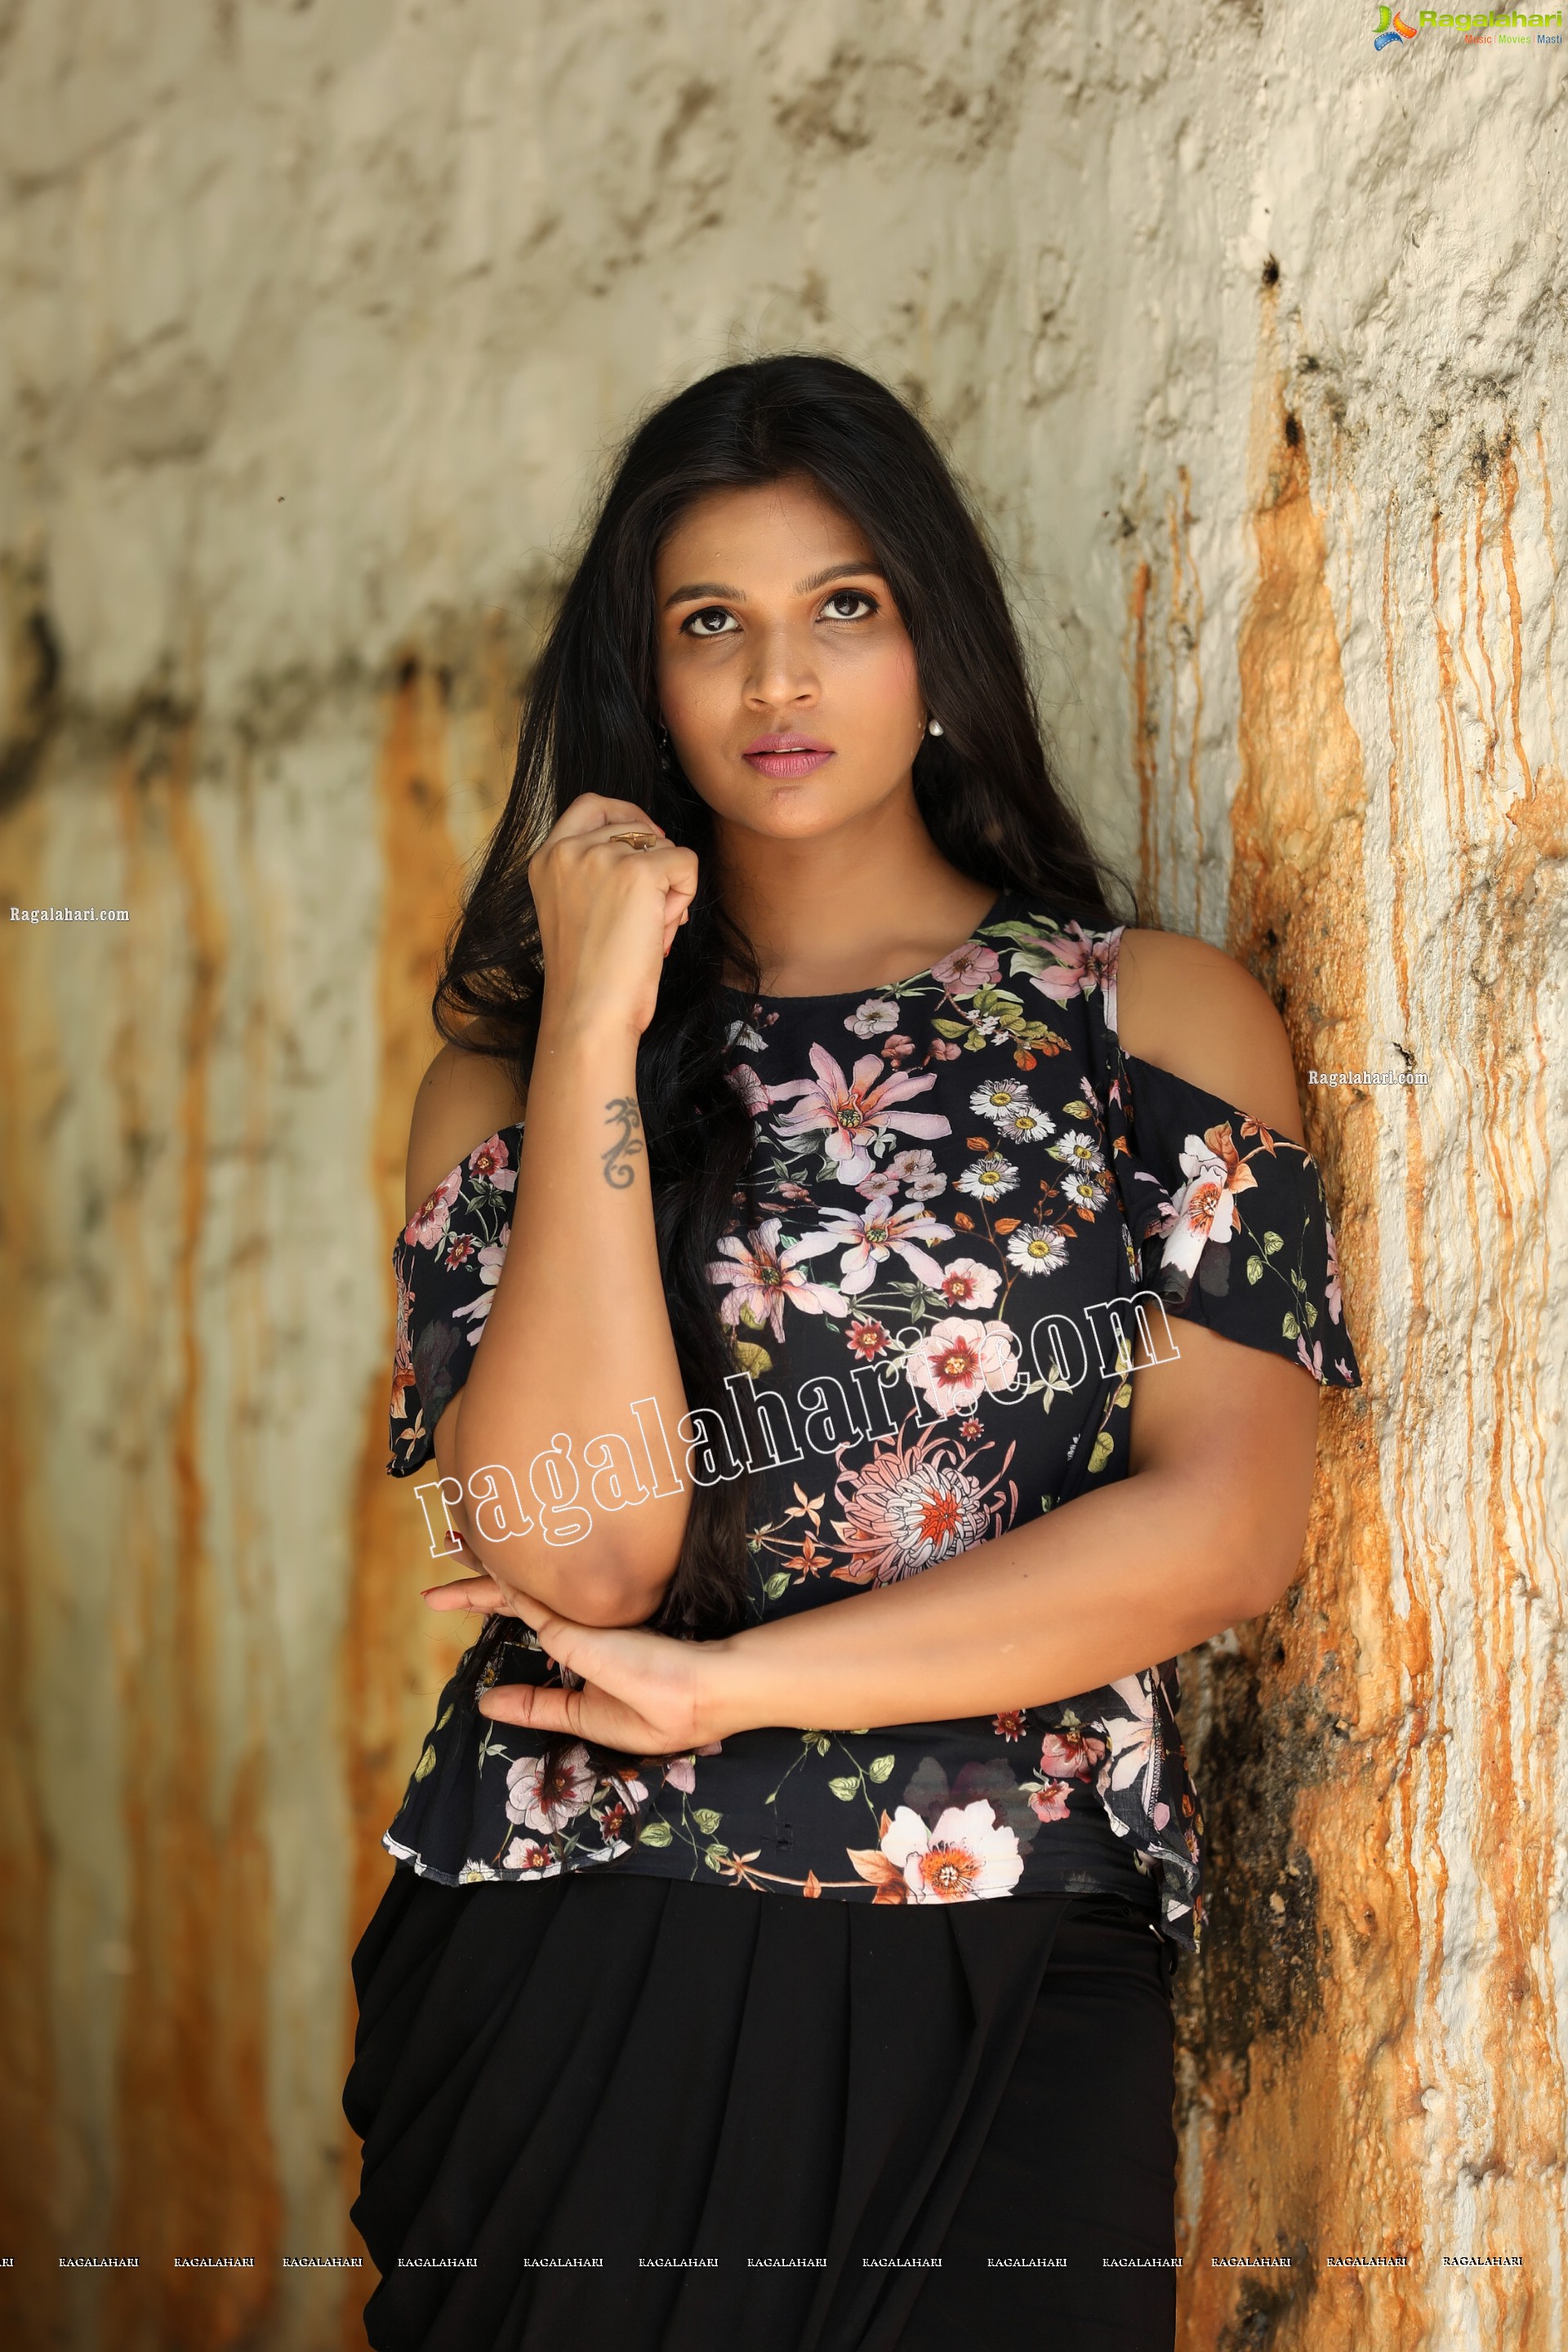 Twinkle Thomala in Black Floral Top and Mini Skirt Exclusive Photo Shoot